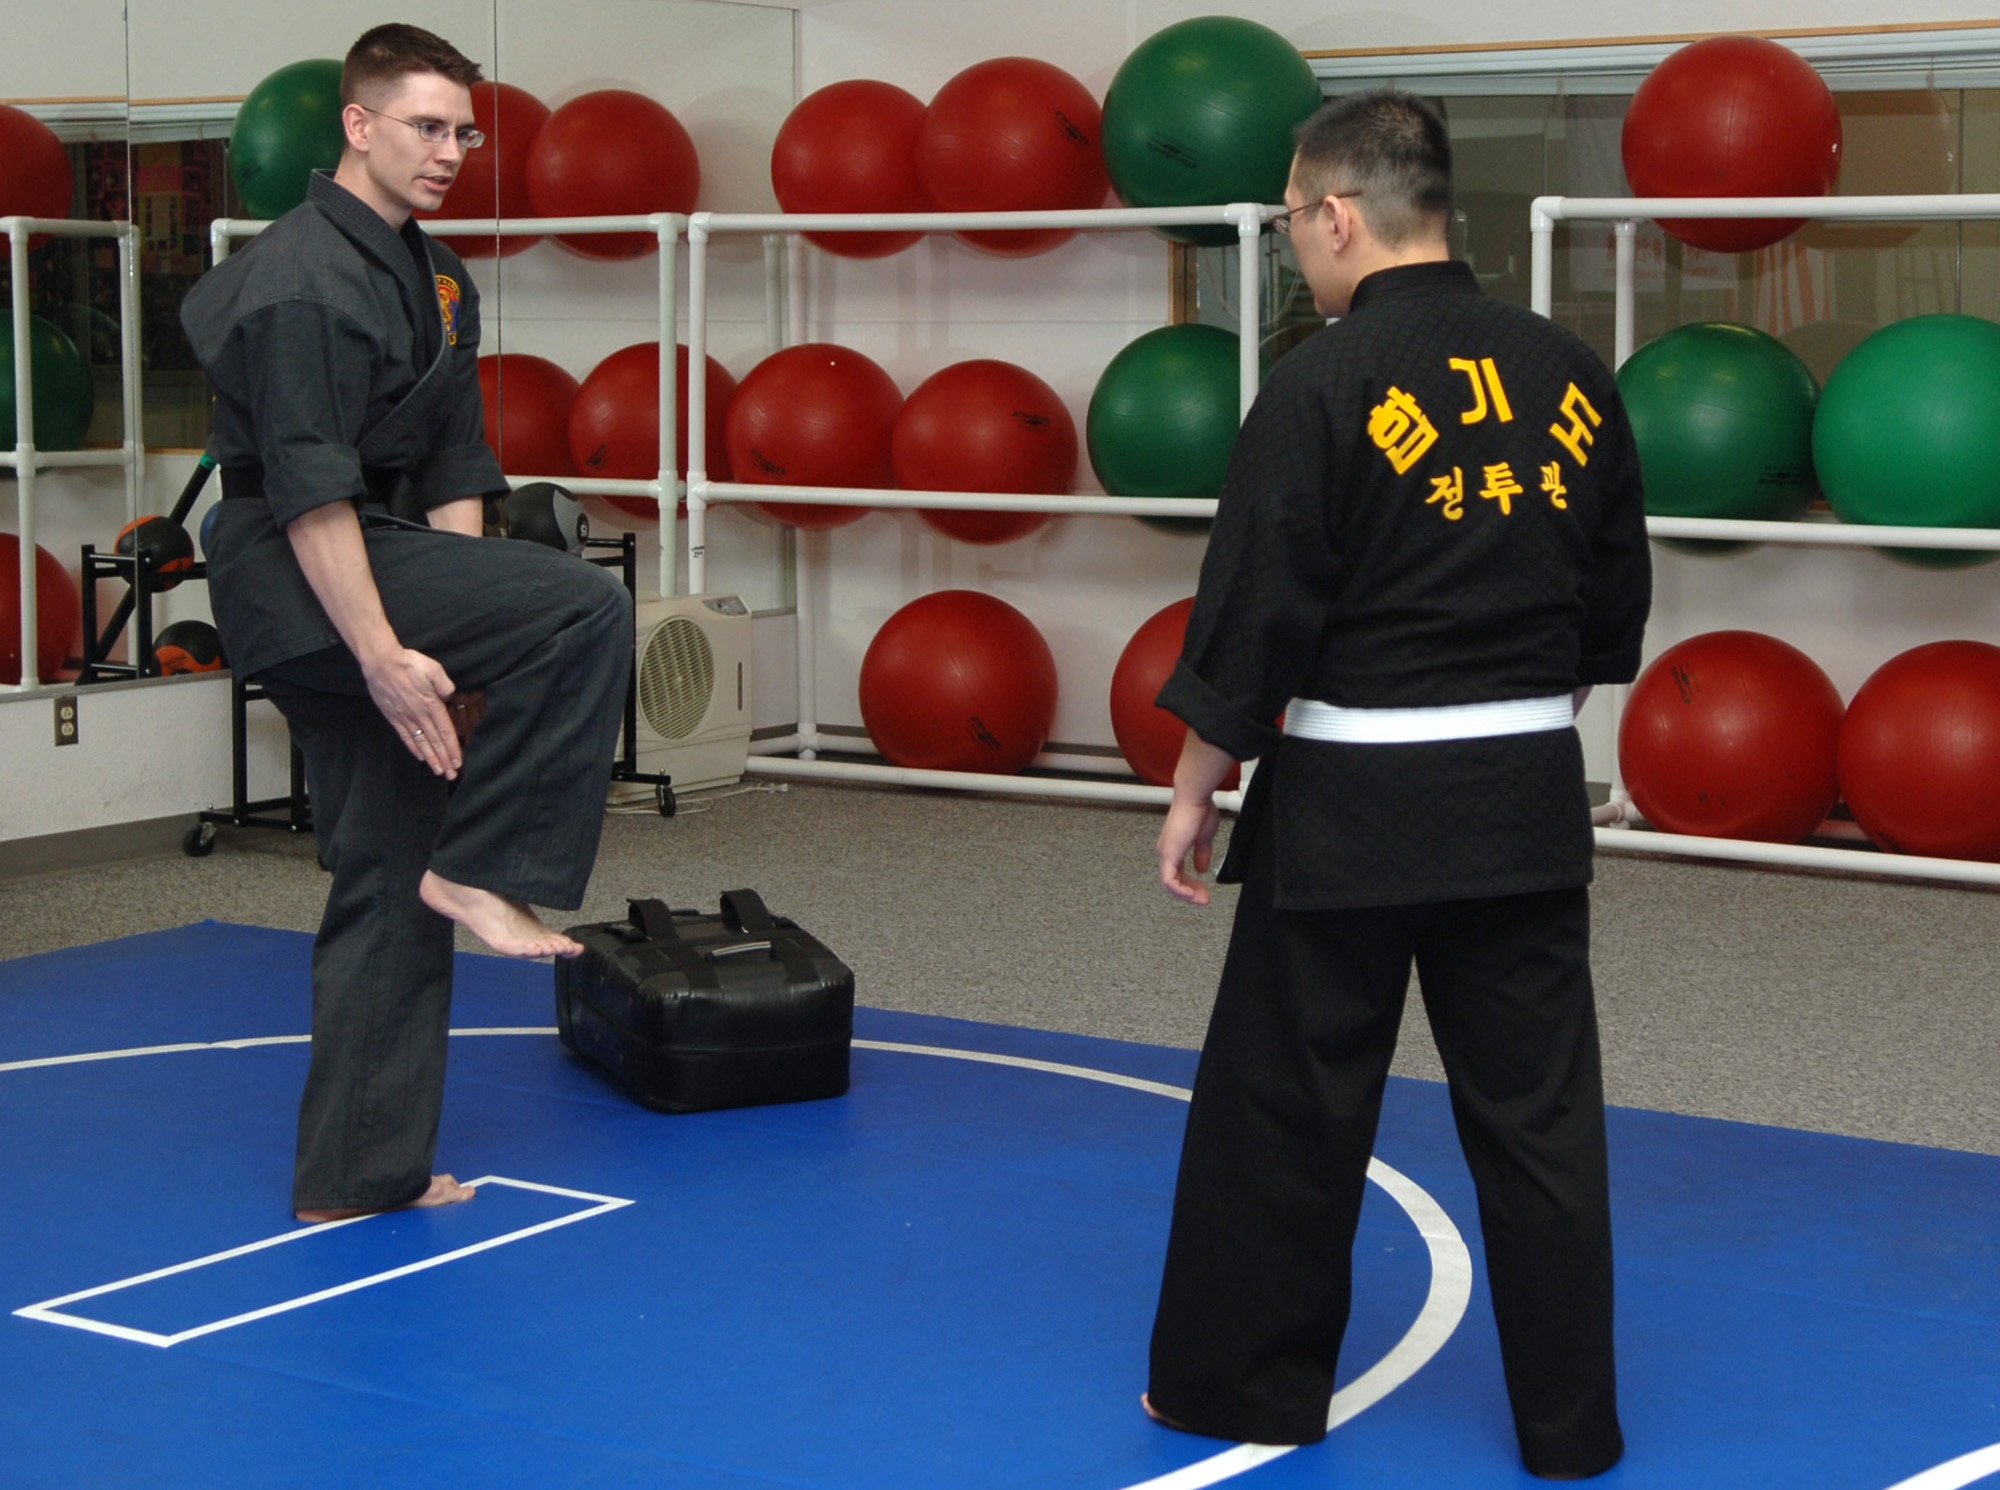 FAIRCHILD AIR FORCE BASE, Wash. -- Staff Sgt. Thomas Locke, 92nd Communications Squadron network administrator, explains in detail how to perform a front kick in Combat Hapkido to Airman 1st Class Gyuseok James Kang, also from the 92nd CS, at the base Fitness Center Feb. 5. Airman Kang has a black belt in Traditional Hapkido, but recognizes the differences in Combat Hapkido and is practicing for his Yellow Belt test. The Combat Hapkido class is offered Tuesdays and Thursdays from 6 to 8 p.m. at the Fitness Center. (U.S. Air Force photo / Senior Airman Jocelyn Ford)